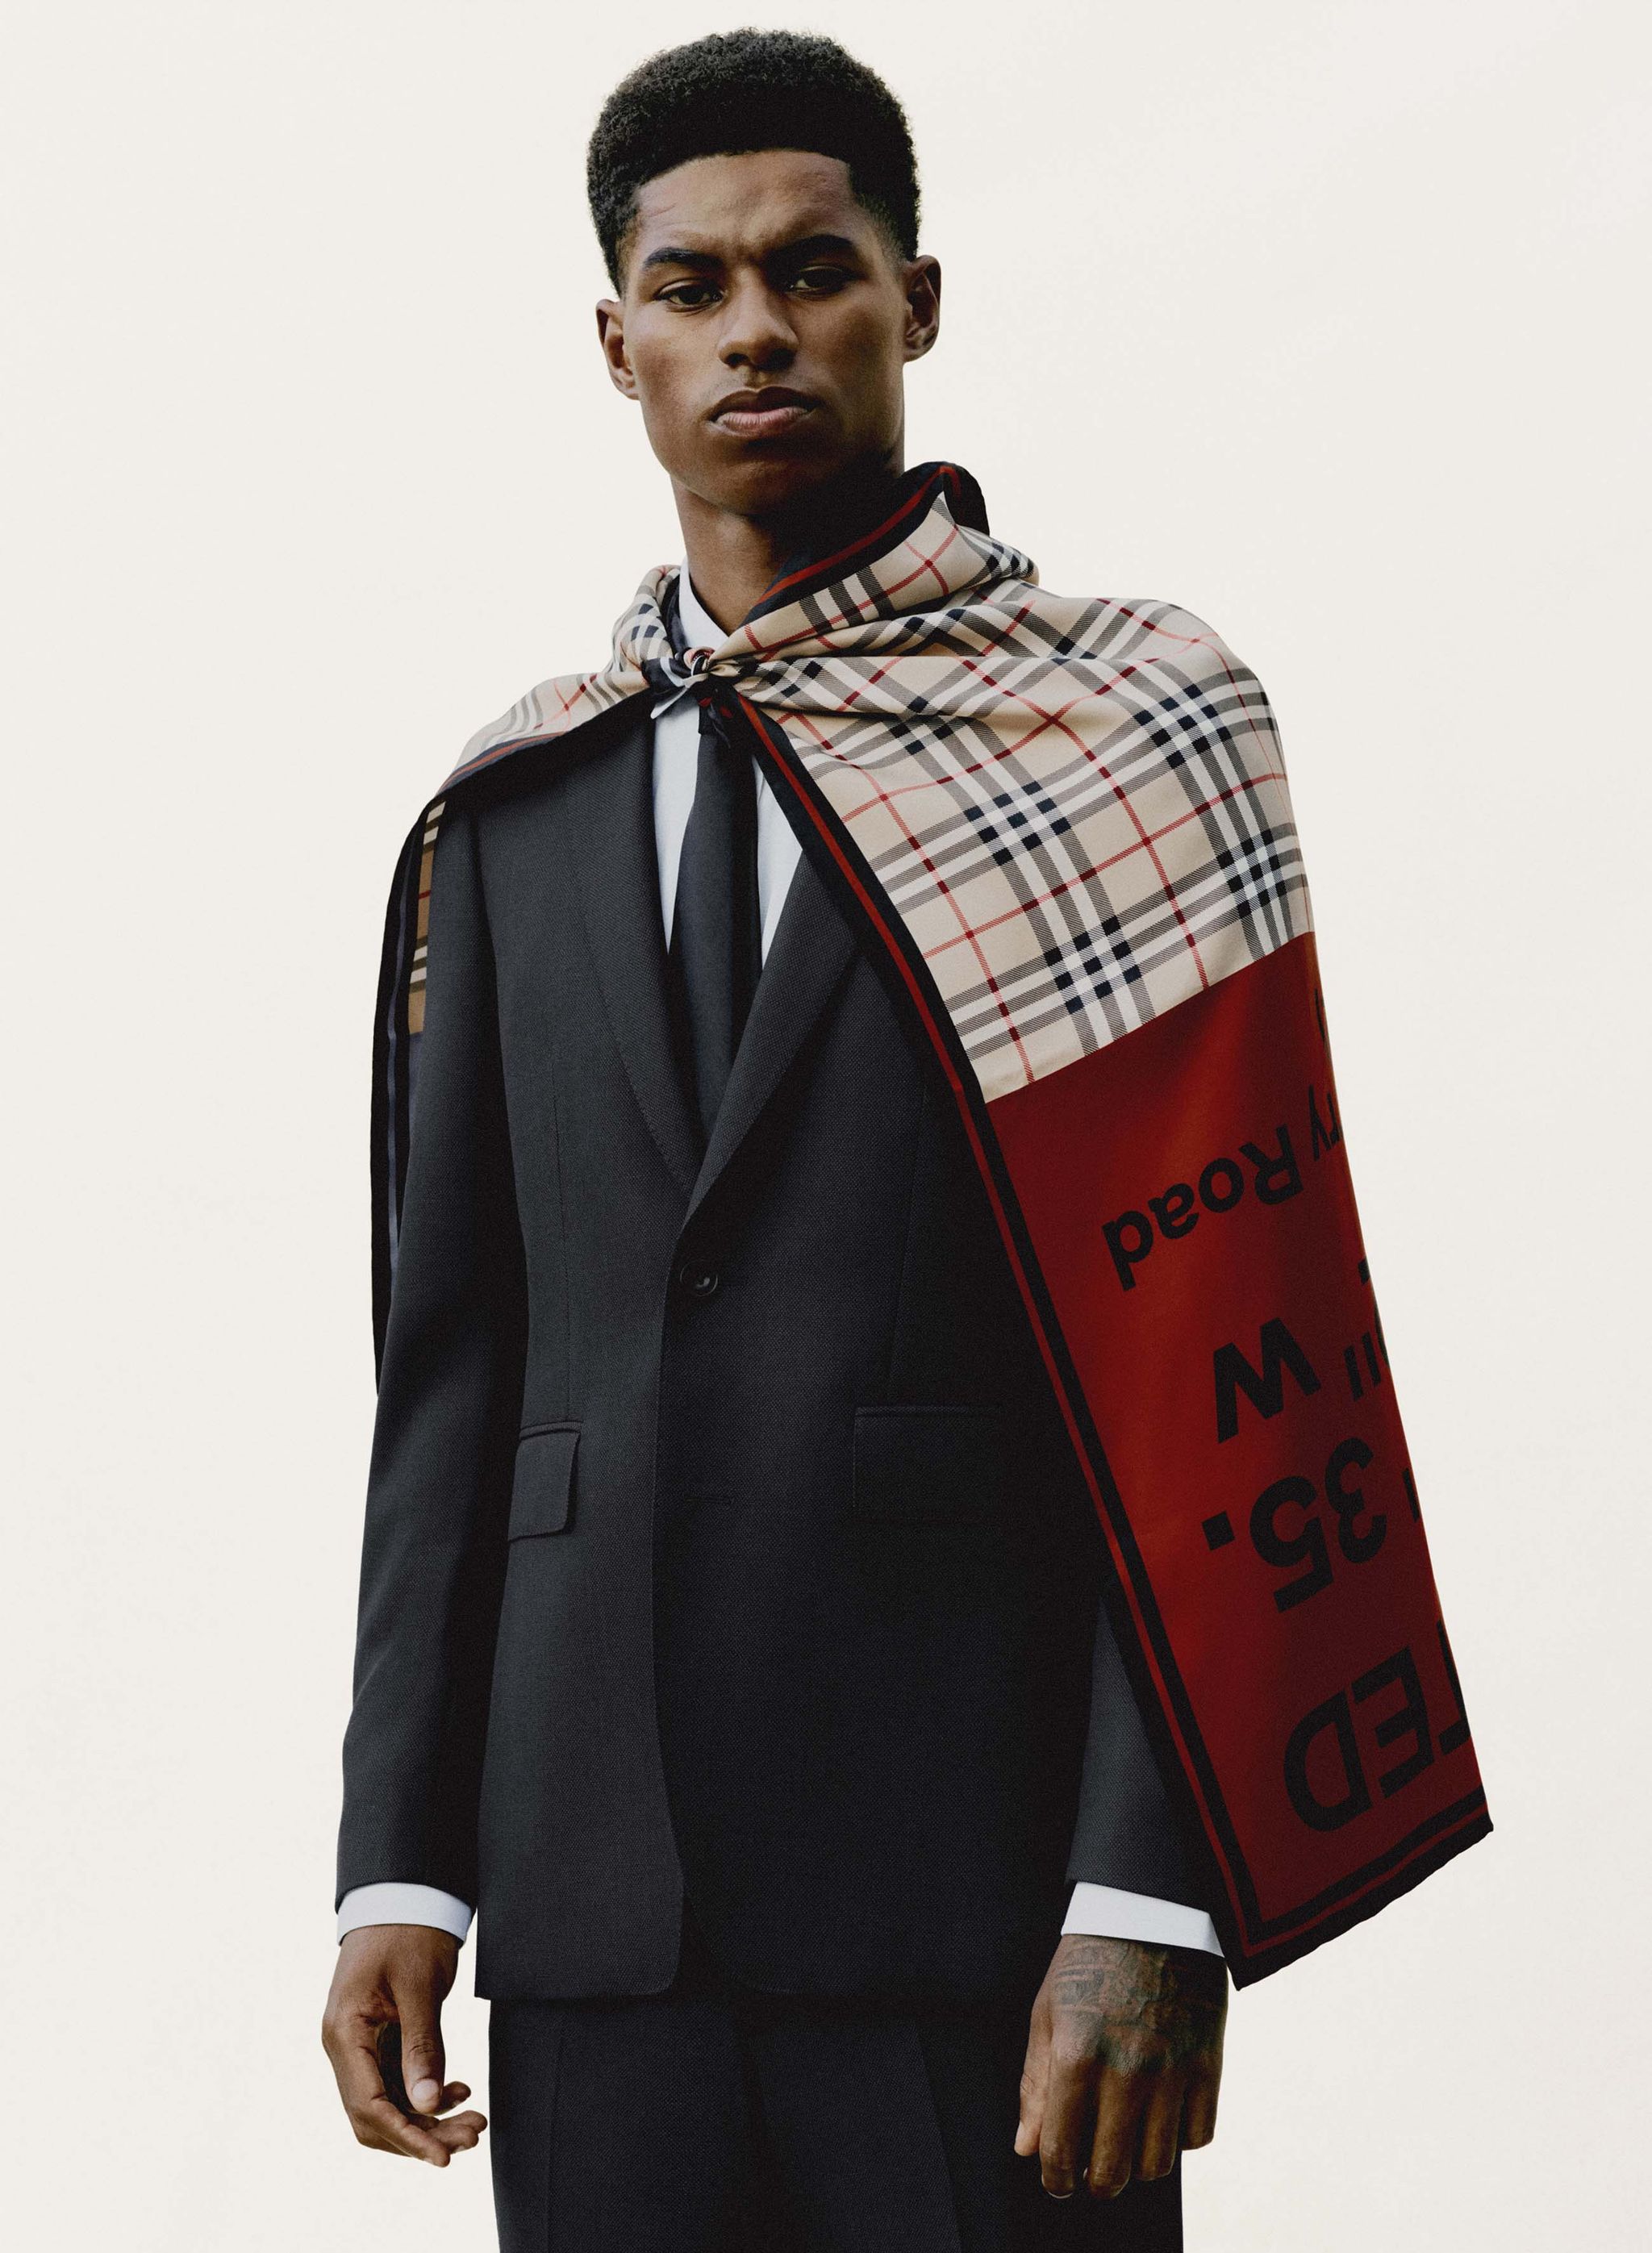 Burberry has teamed up with Marcus Rashford on a youth charity project